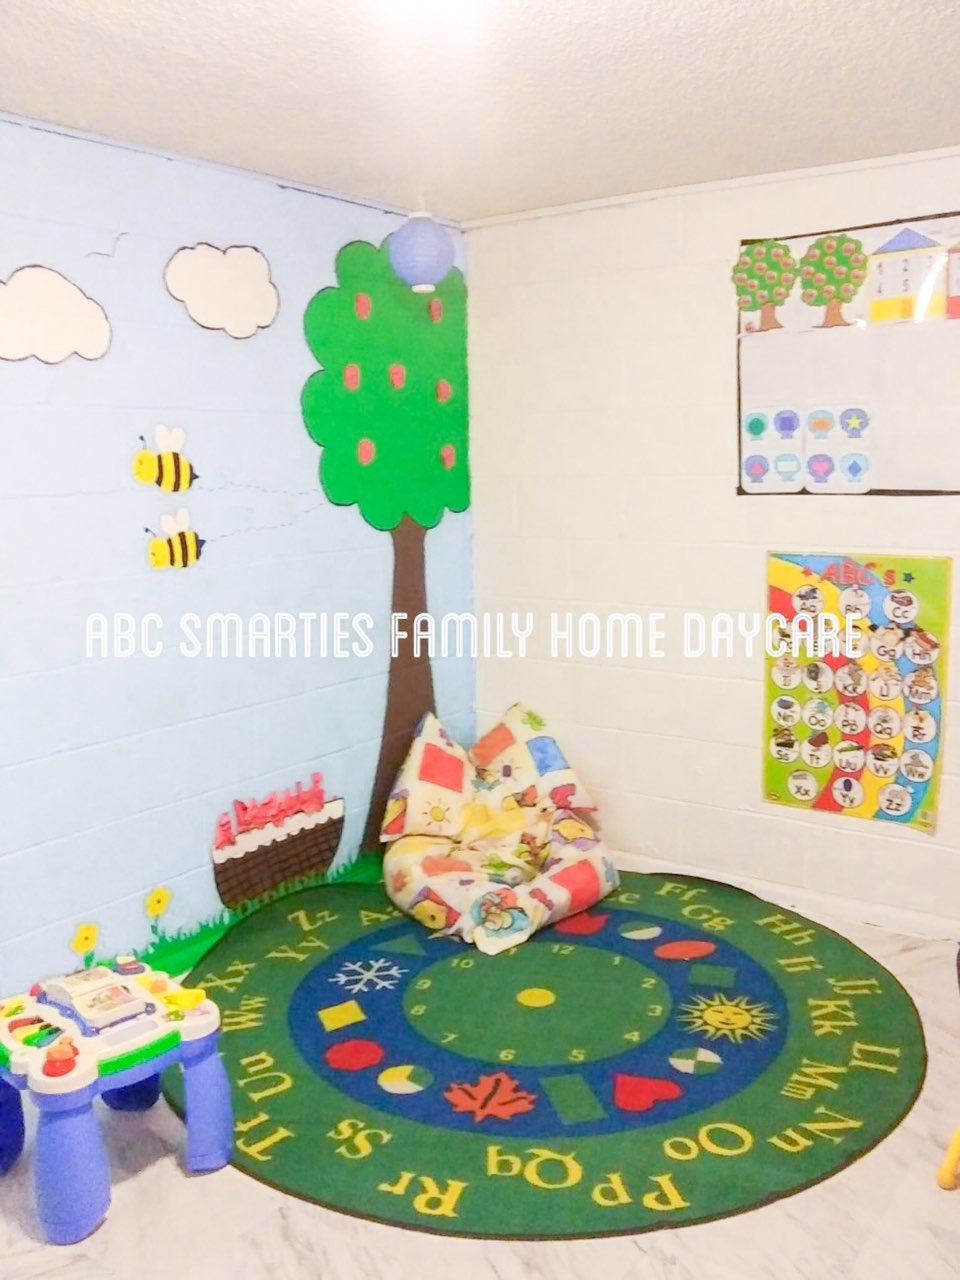 ABC Smarties Family Home Daycare